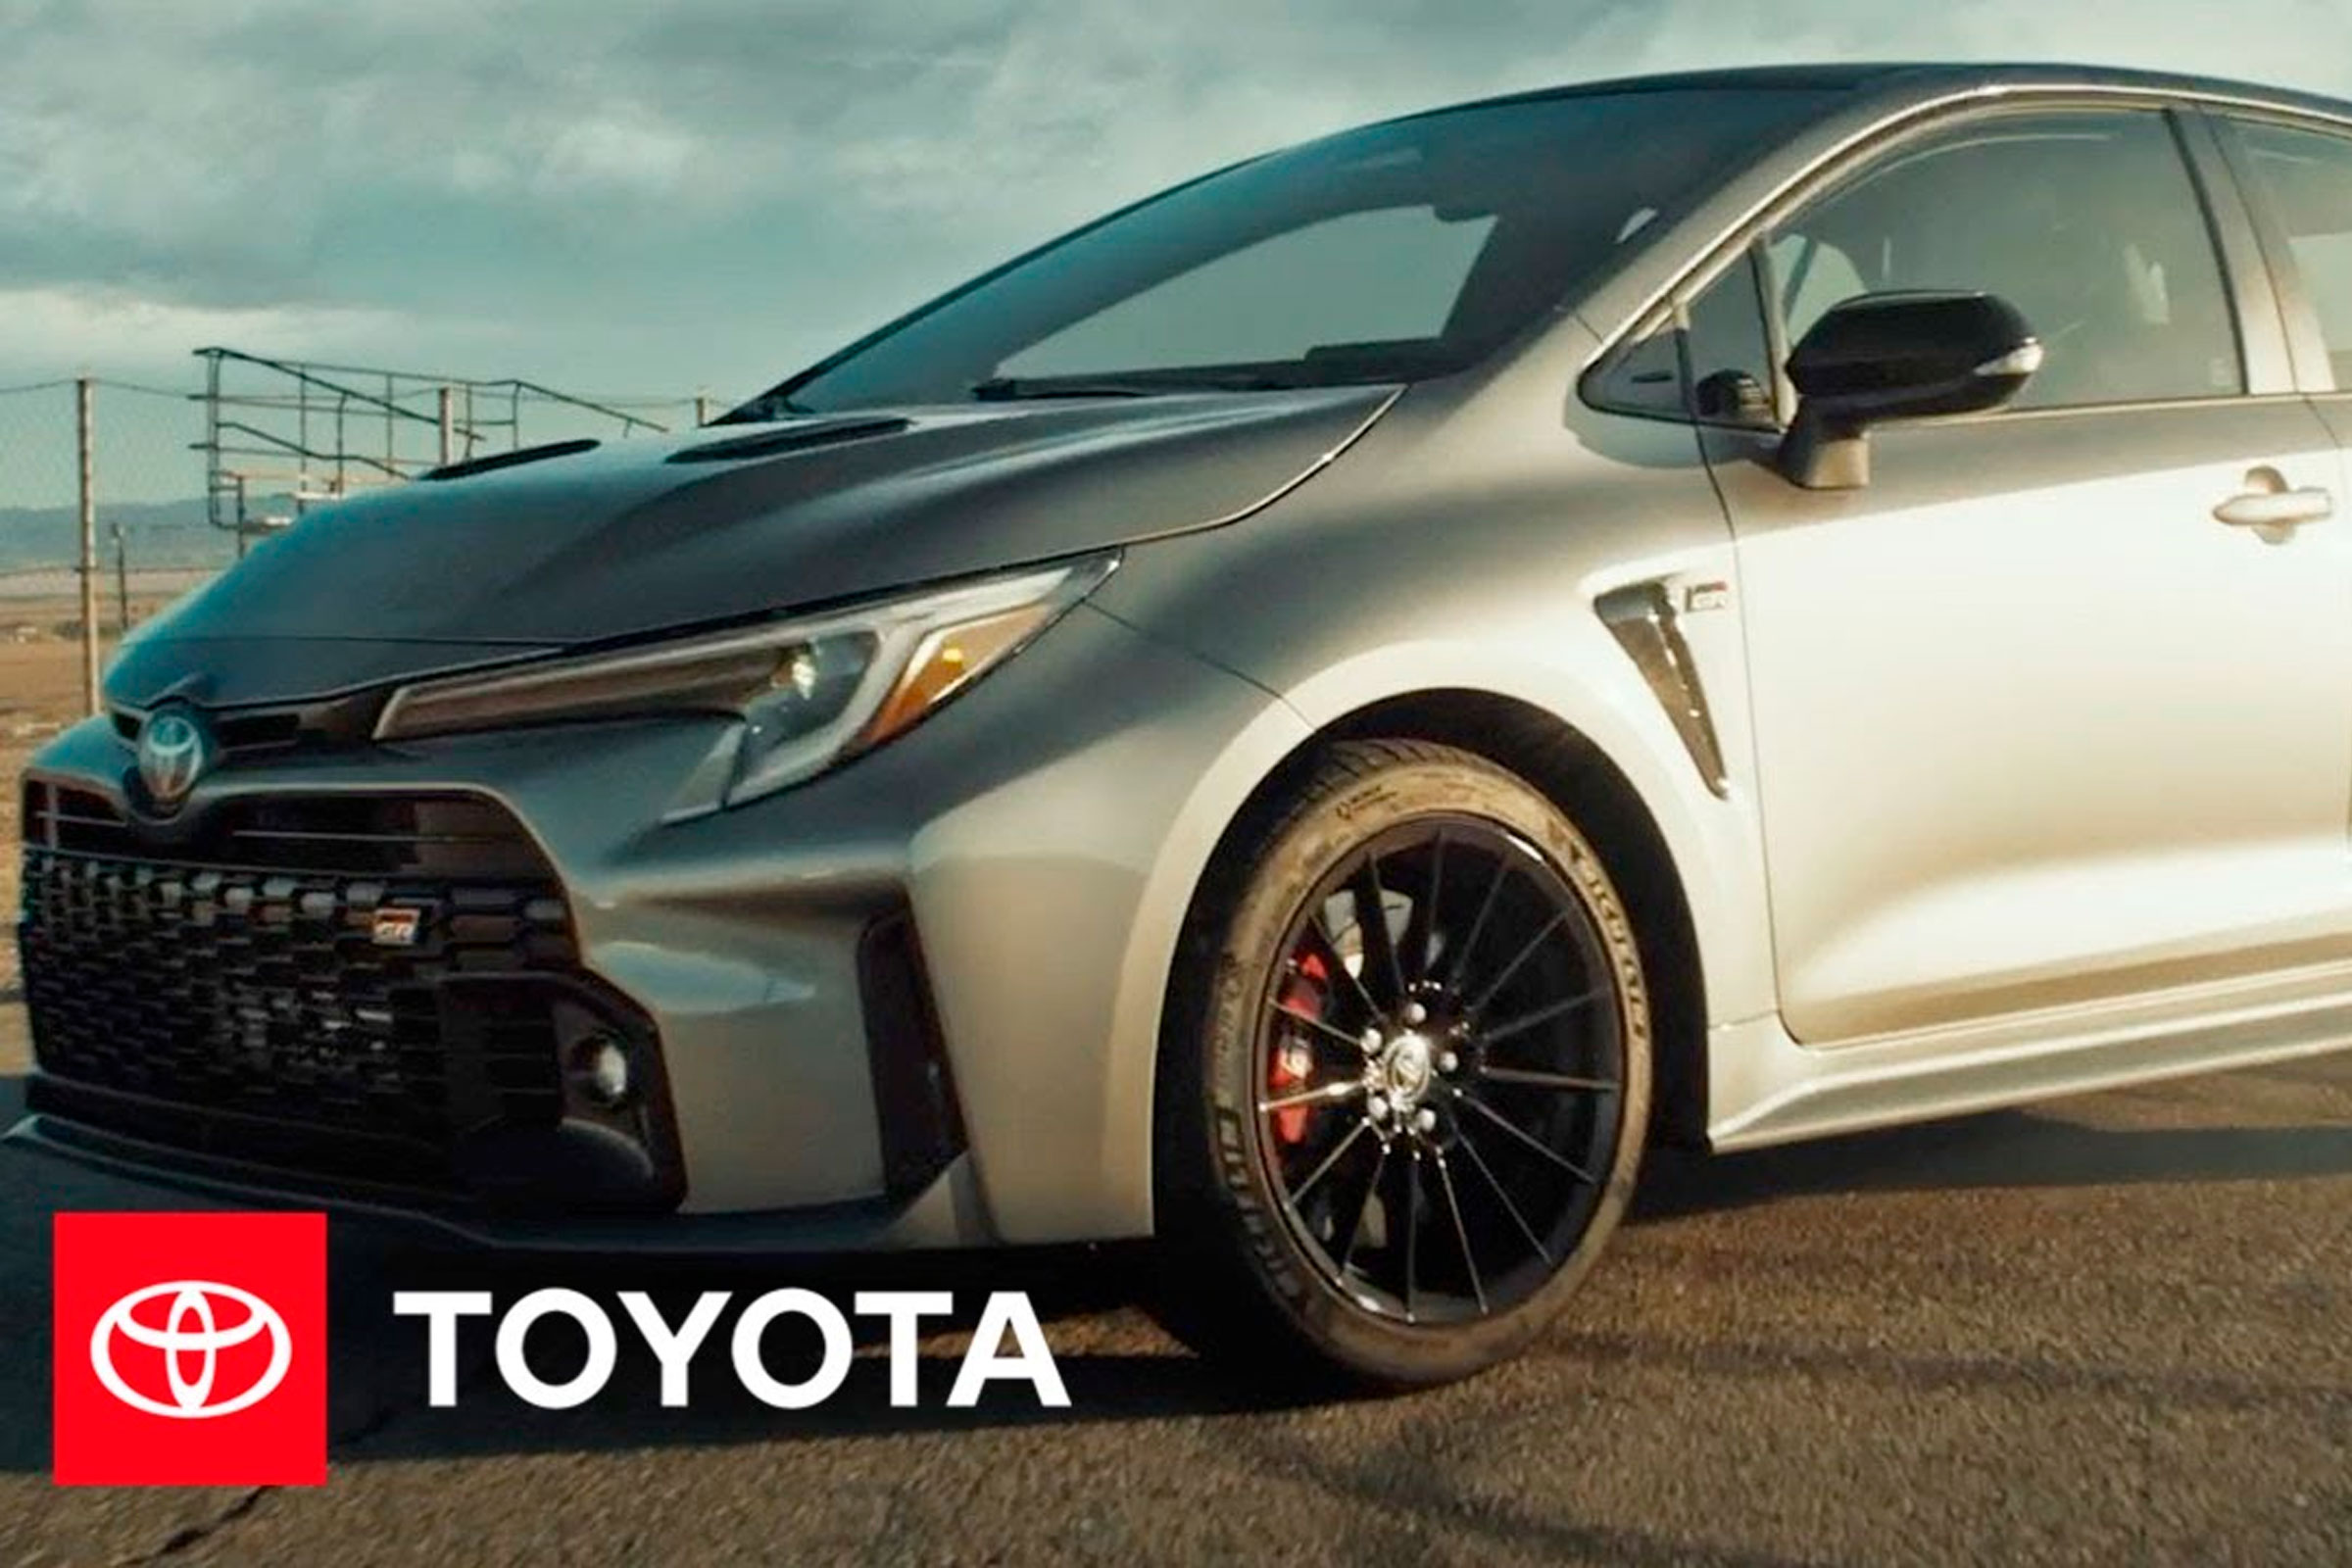 Toyota’s spot “That’s Insane” was developed by Intertrend Communications for the GR Corolla campaign.